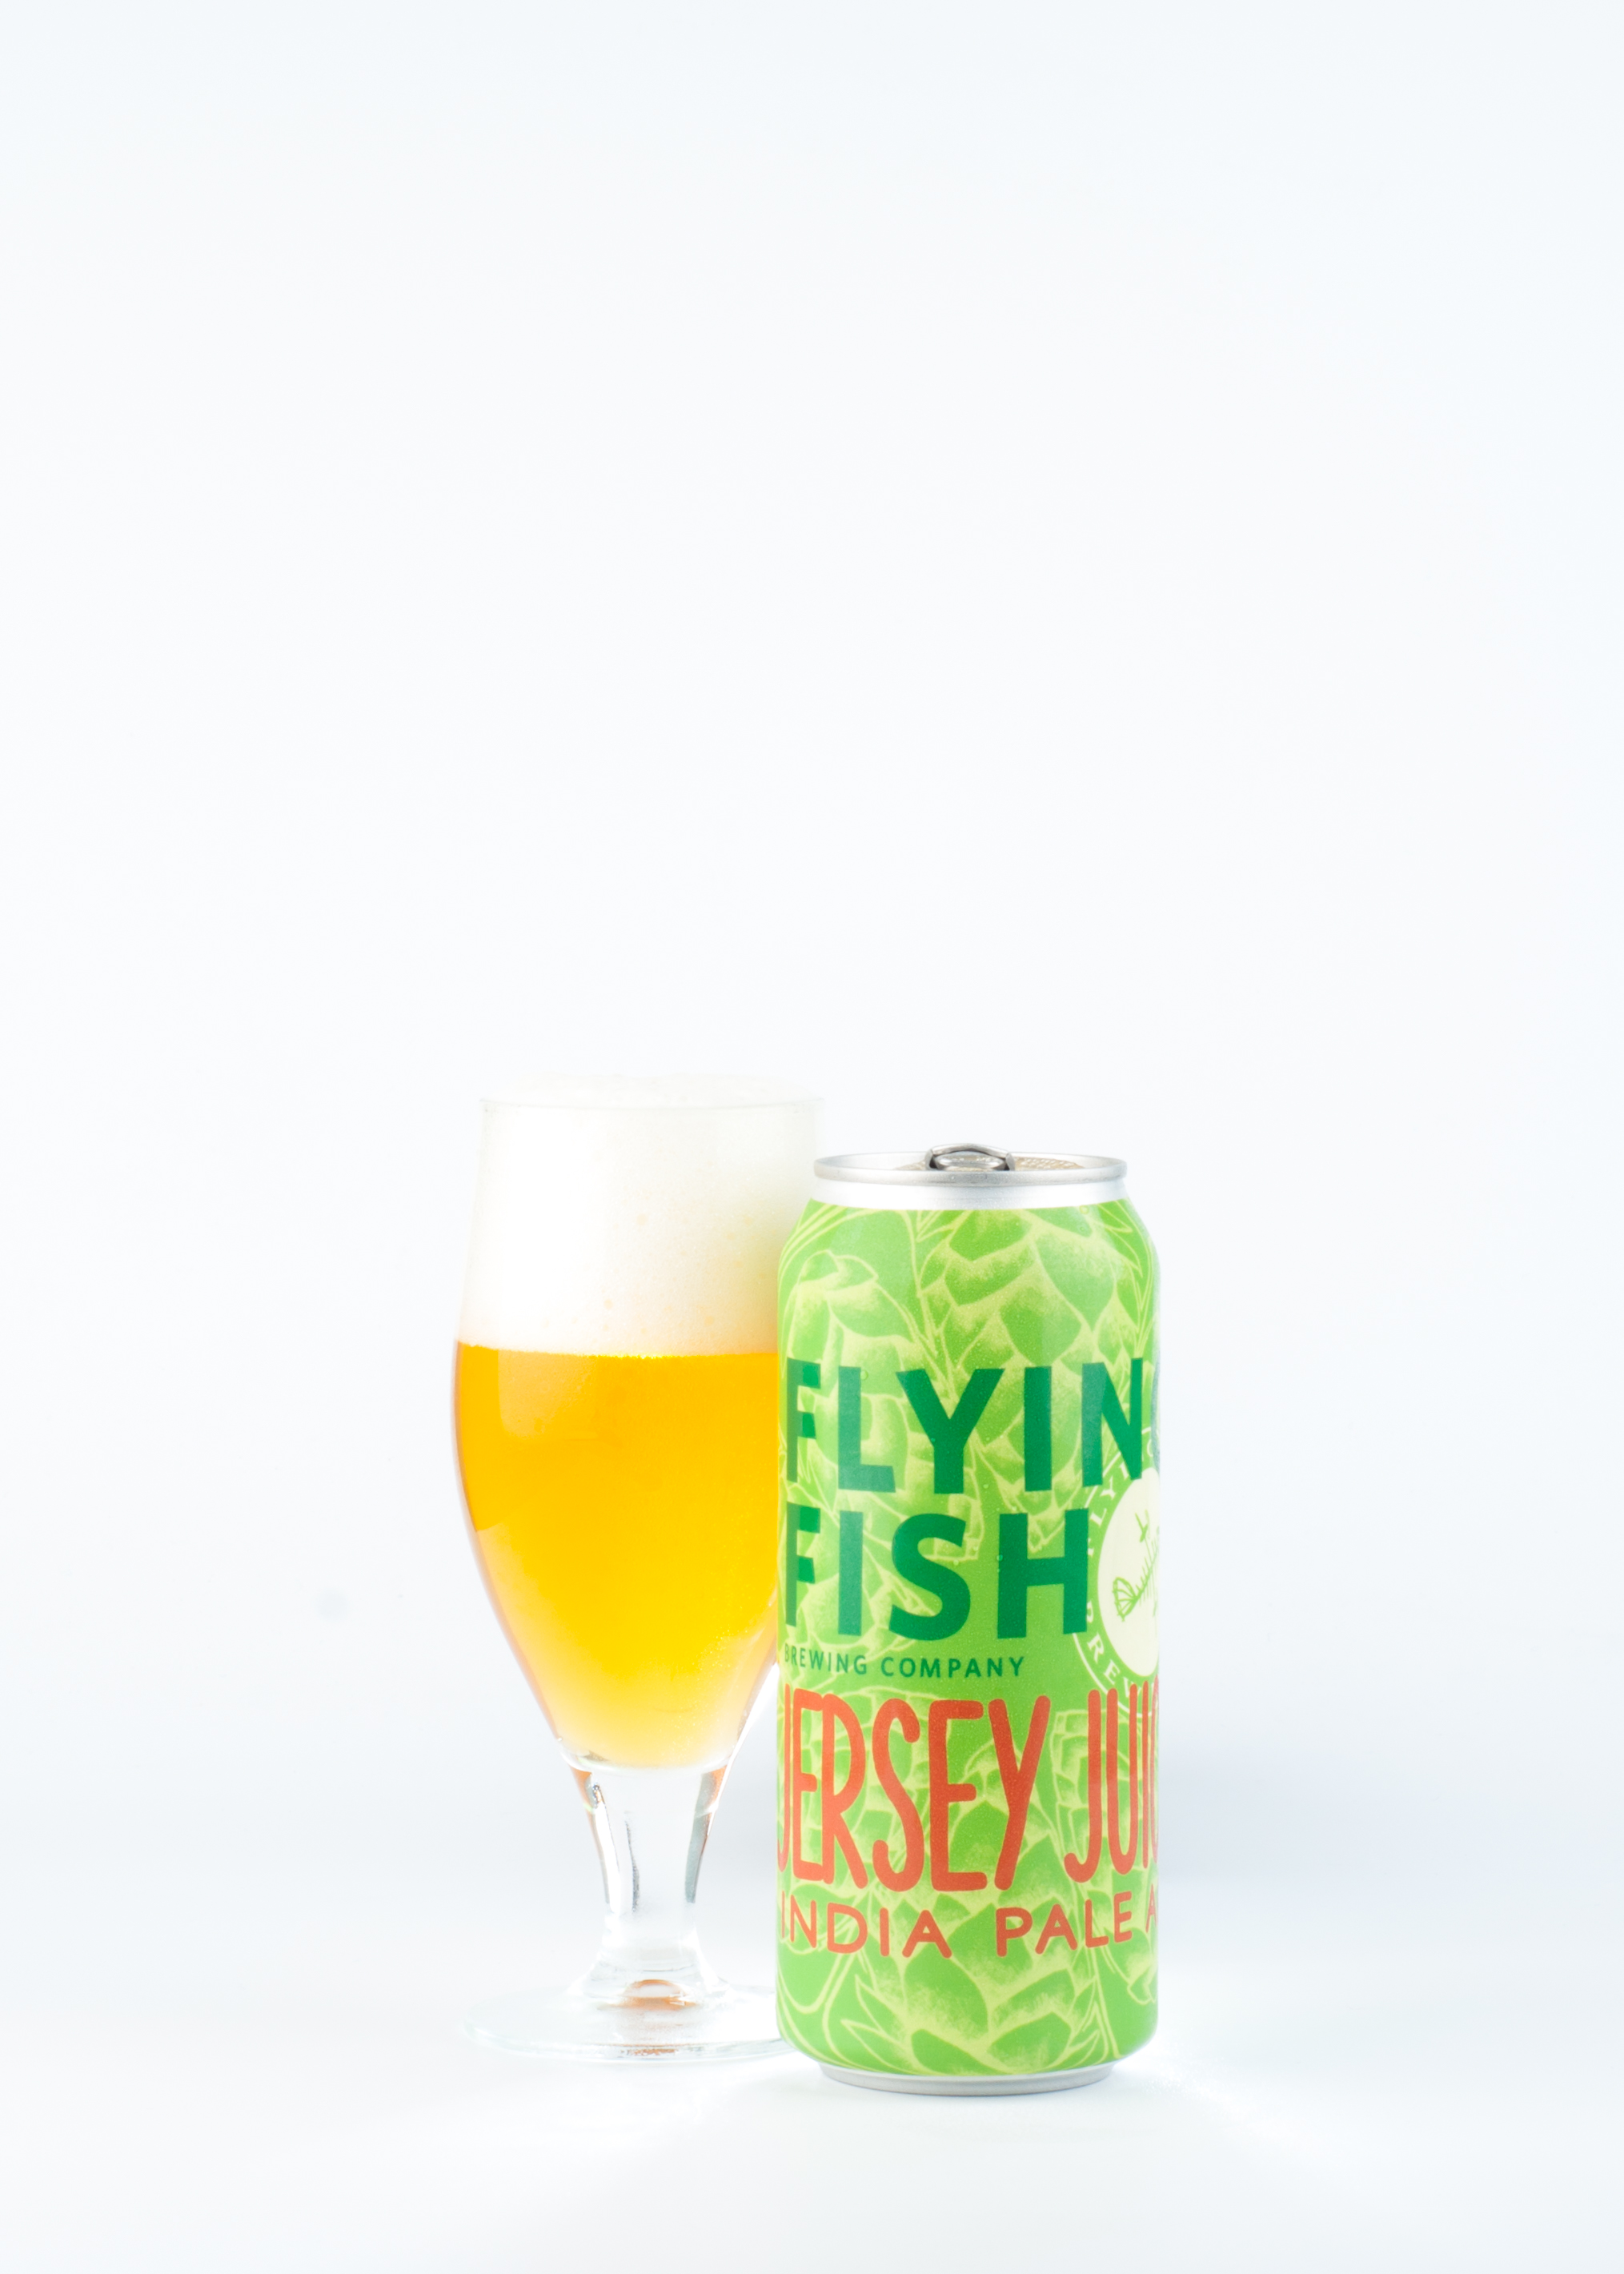 Flying Fish Brewing Co. Jersey Juice India Pale Ale Beer, New